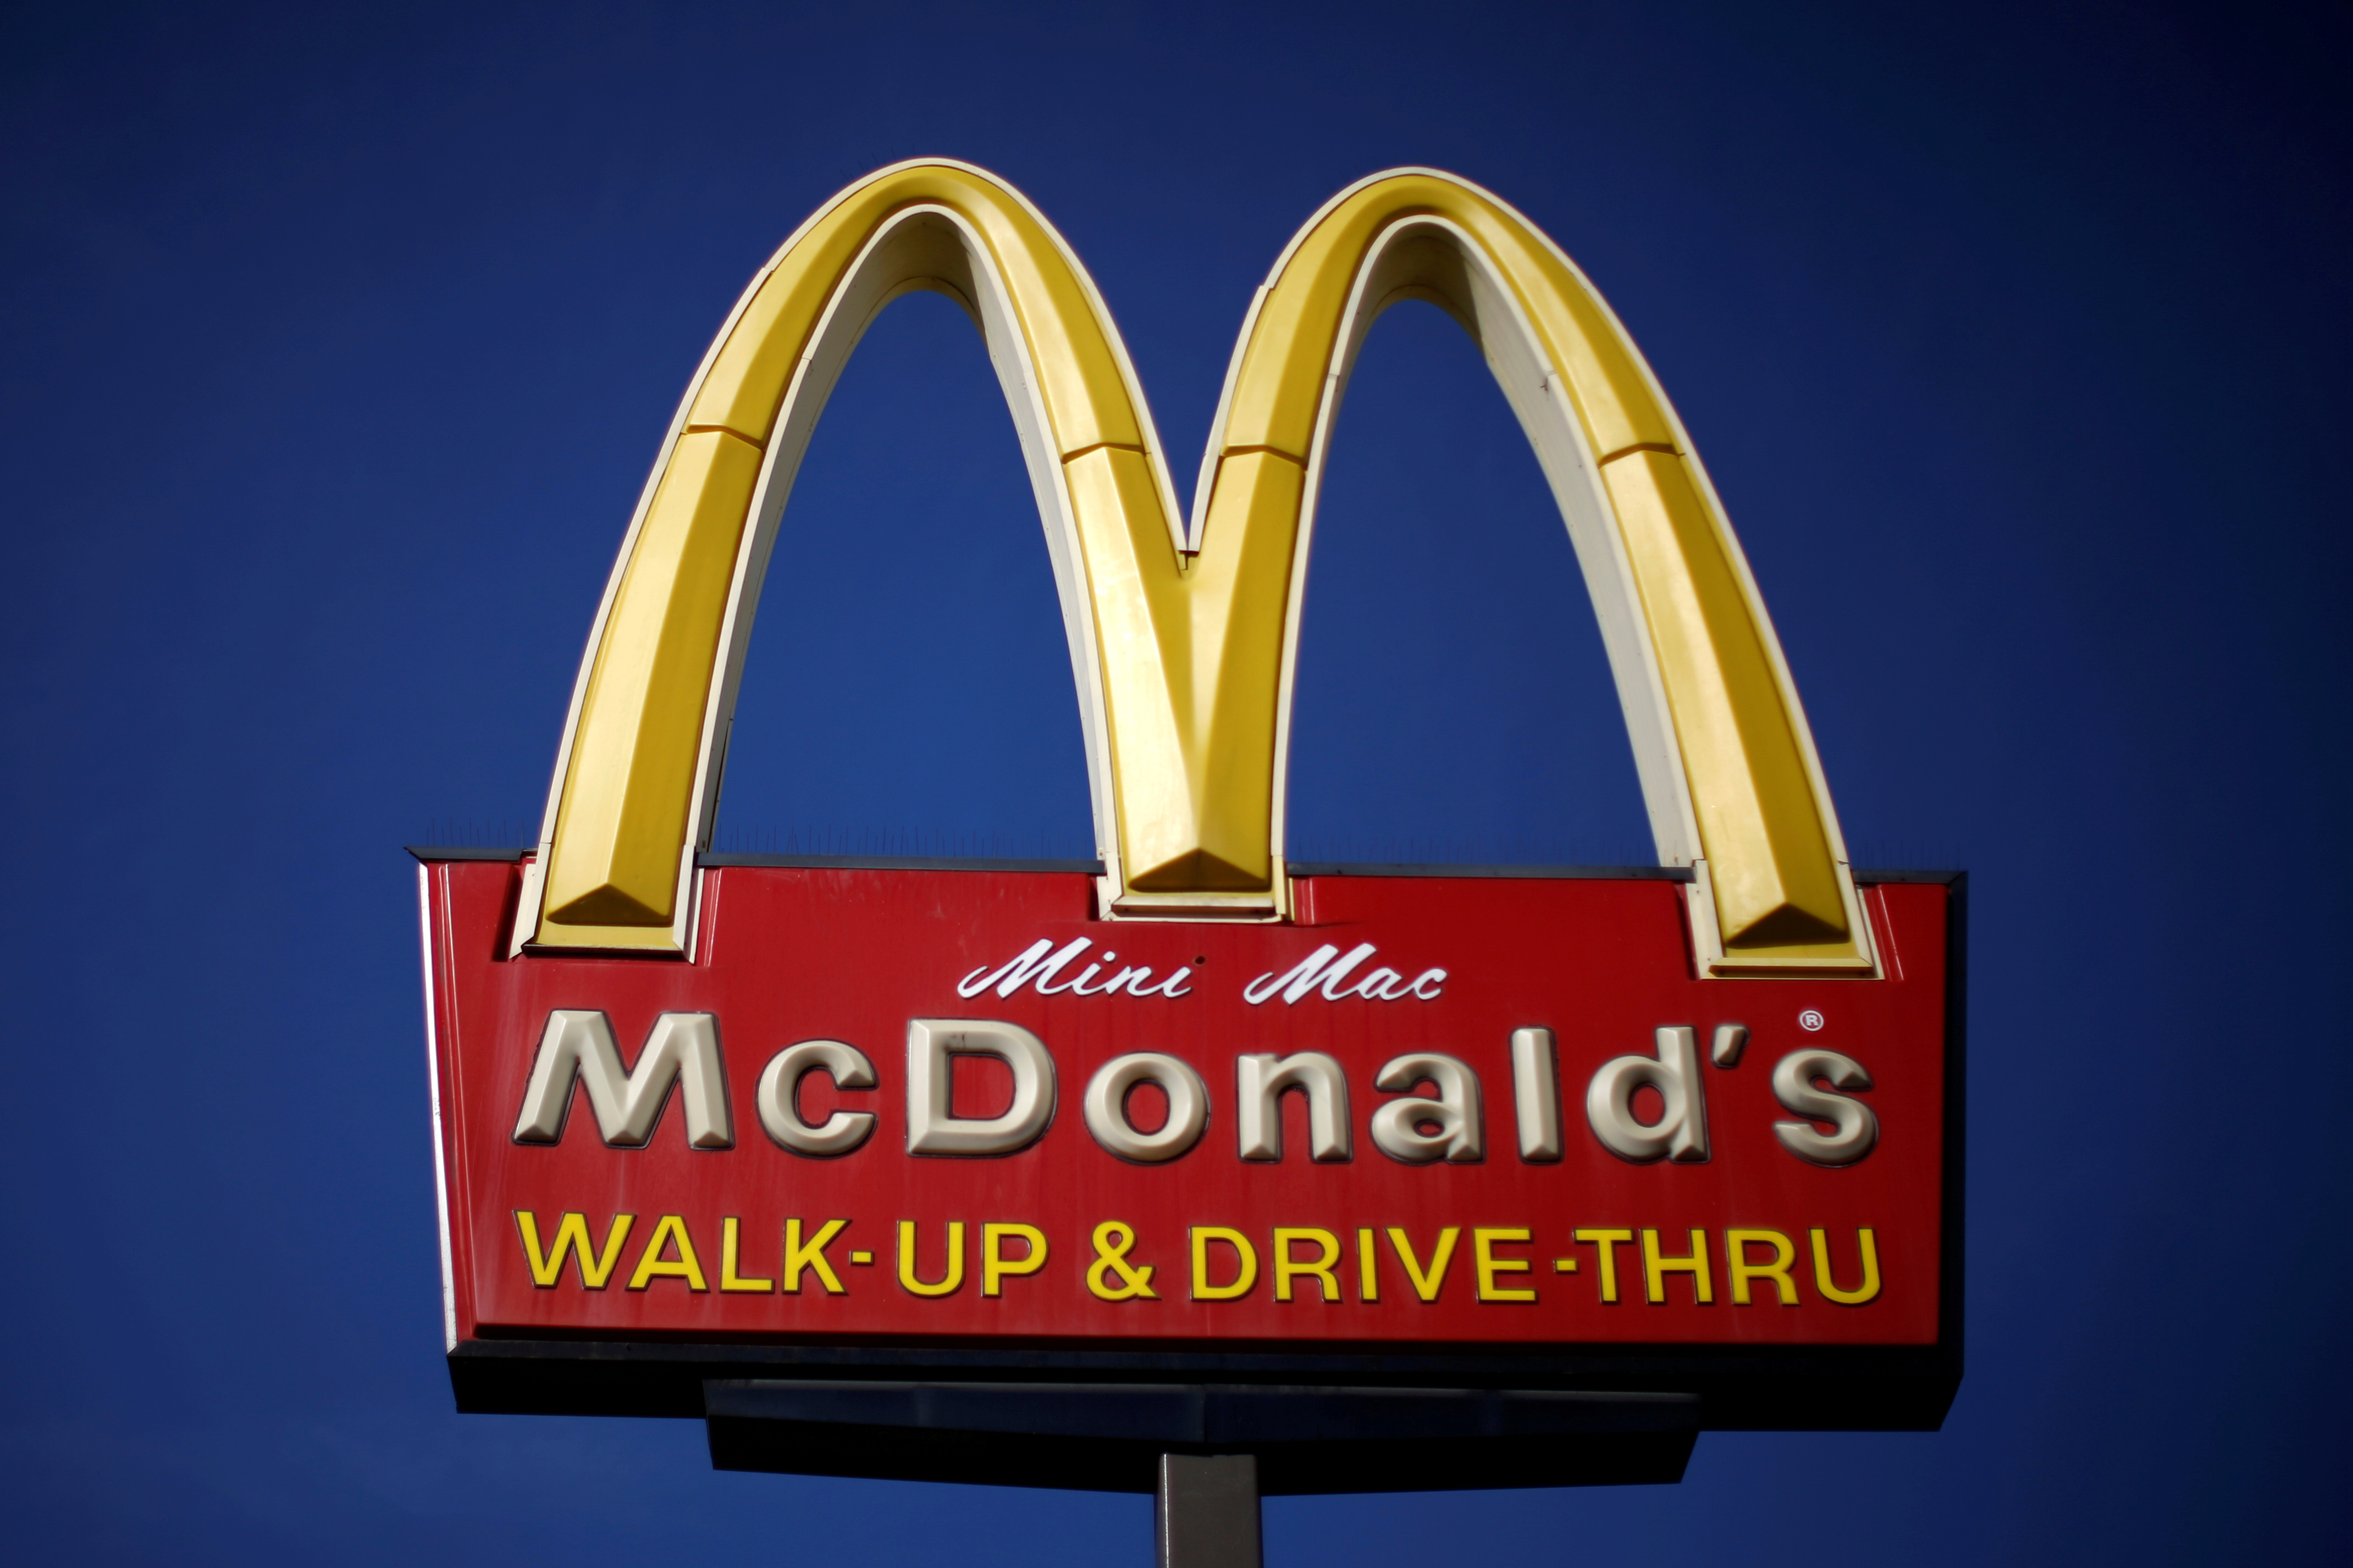 The logo of McDonald's (MCD) is seen in Los Angeles